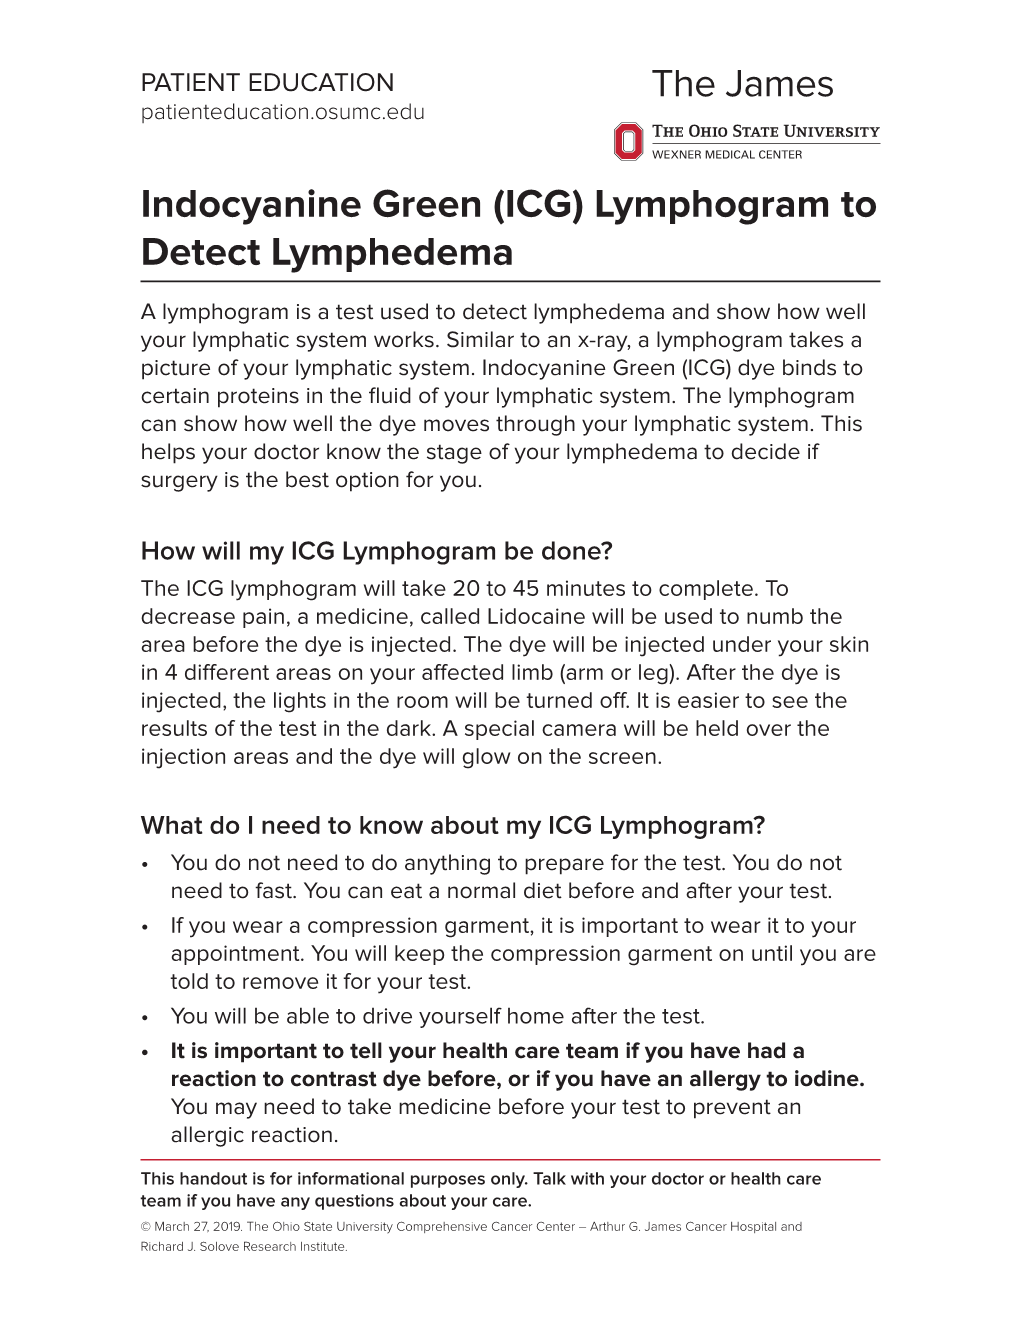 Indocyanine Green (ICG) Lymphogram to Detect Lymphedema